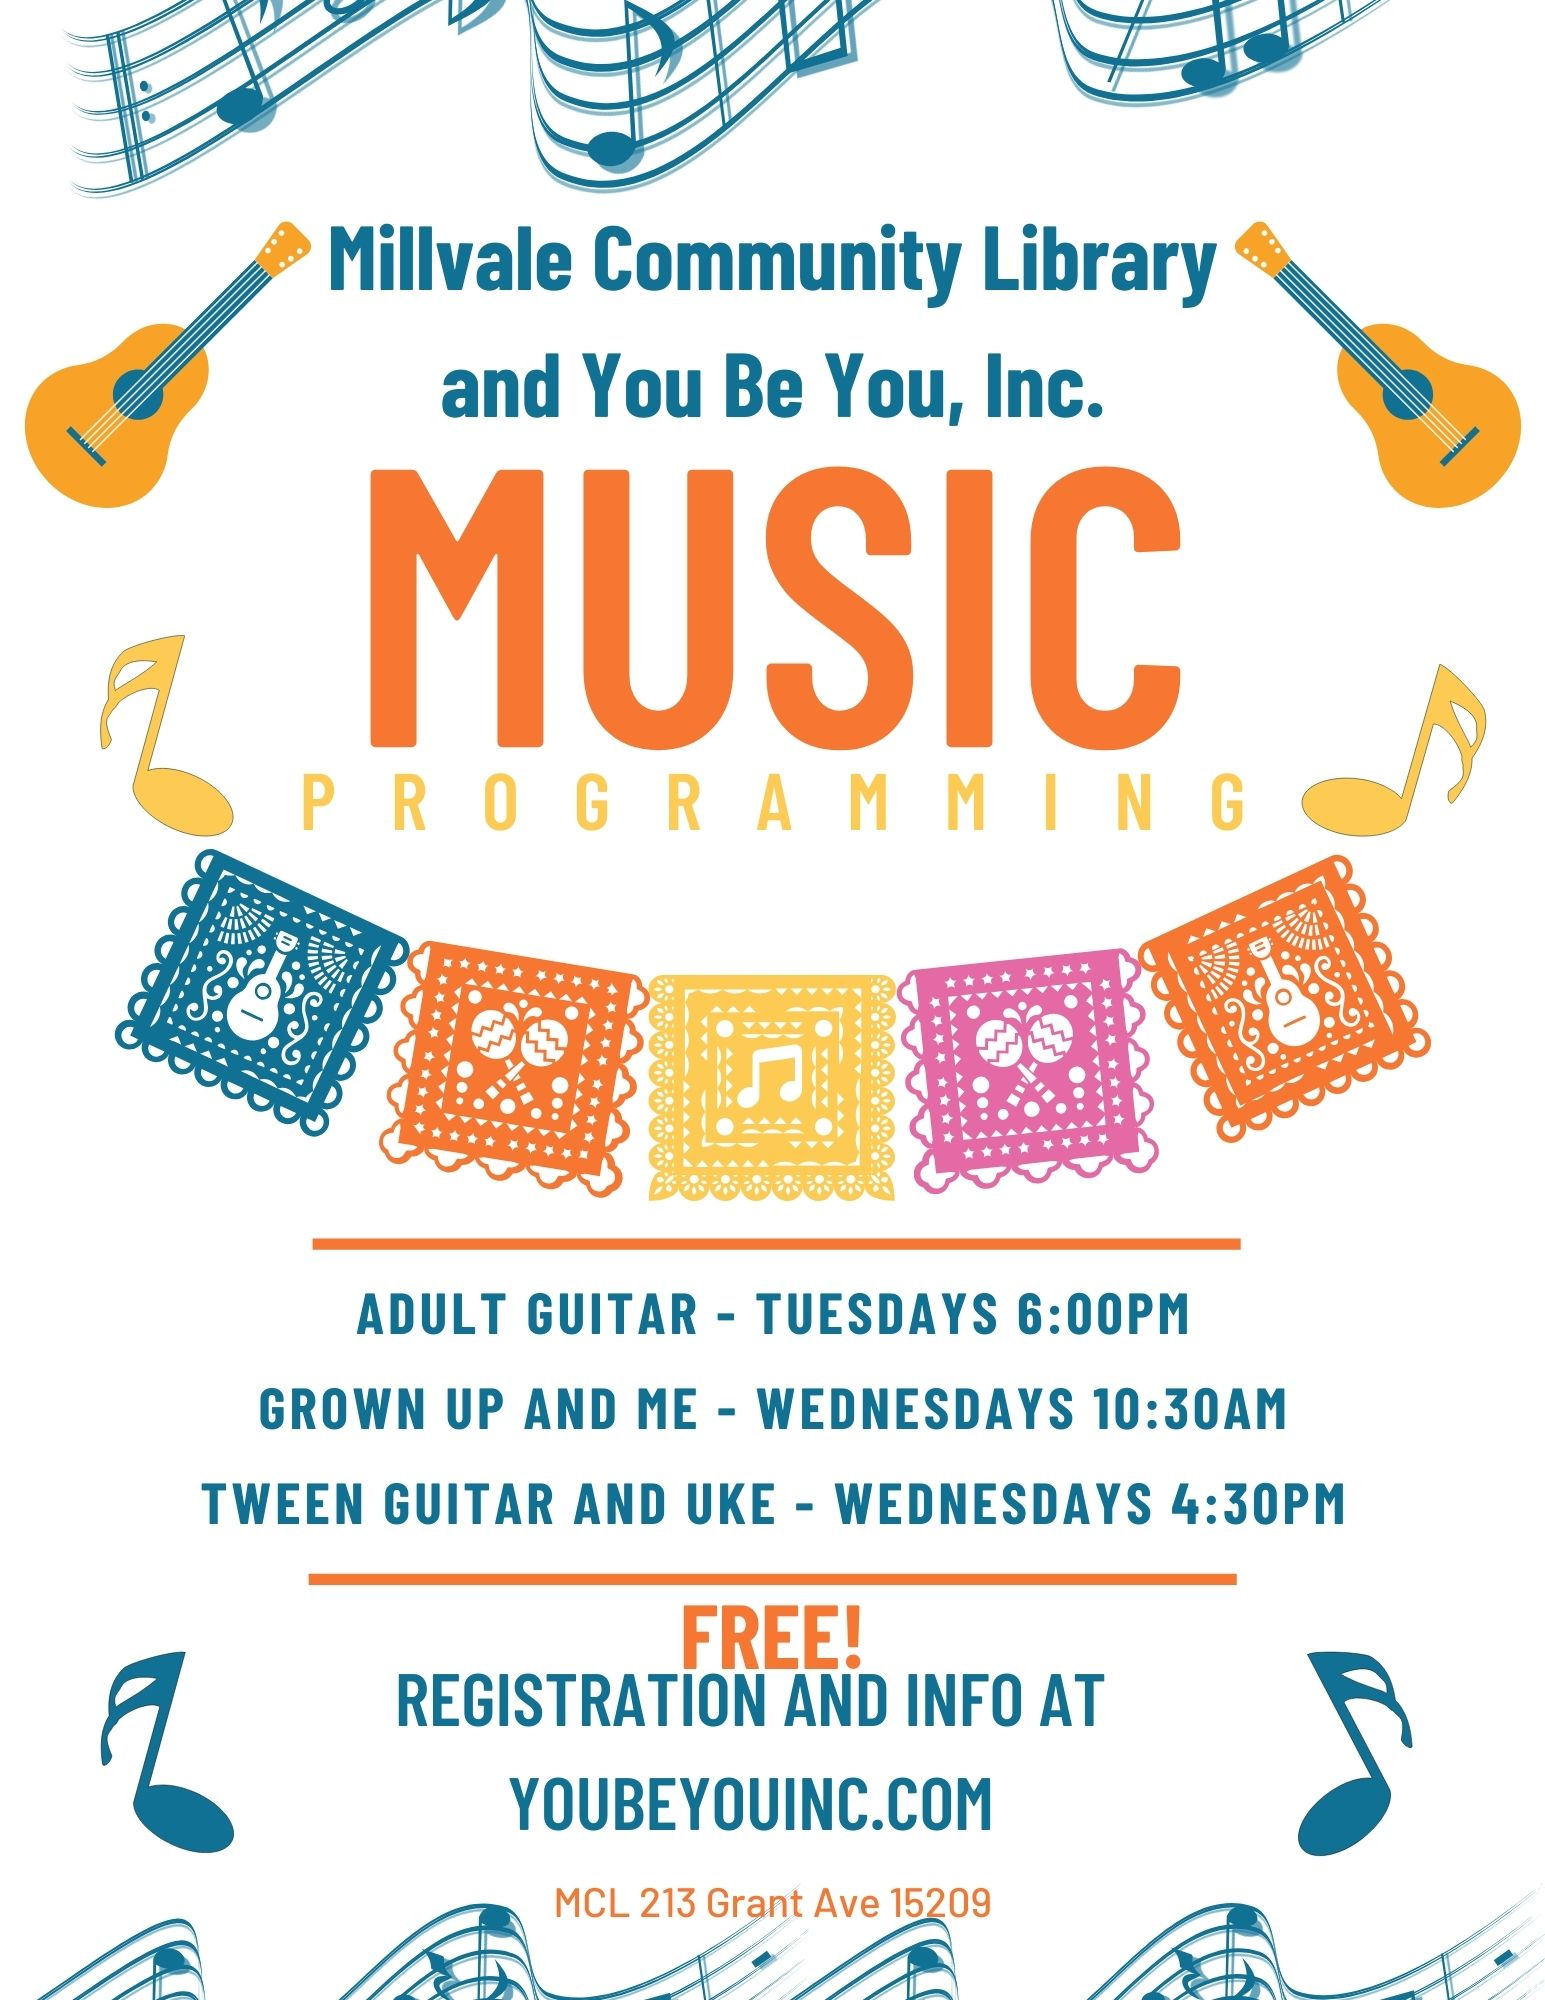 Colorful photo outlining you be you and Millvale library's music programming